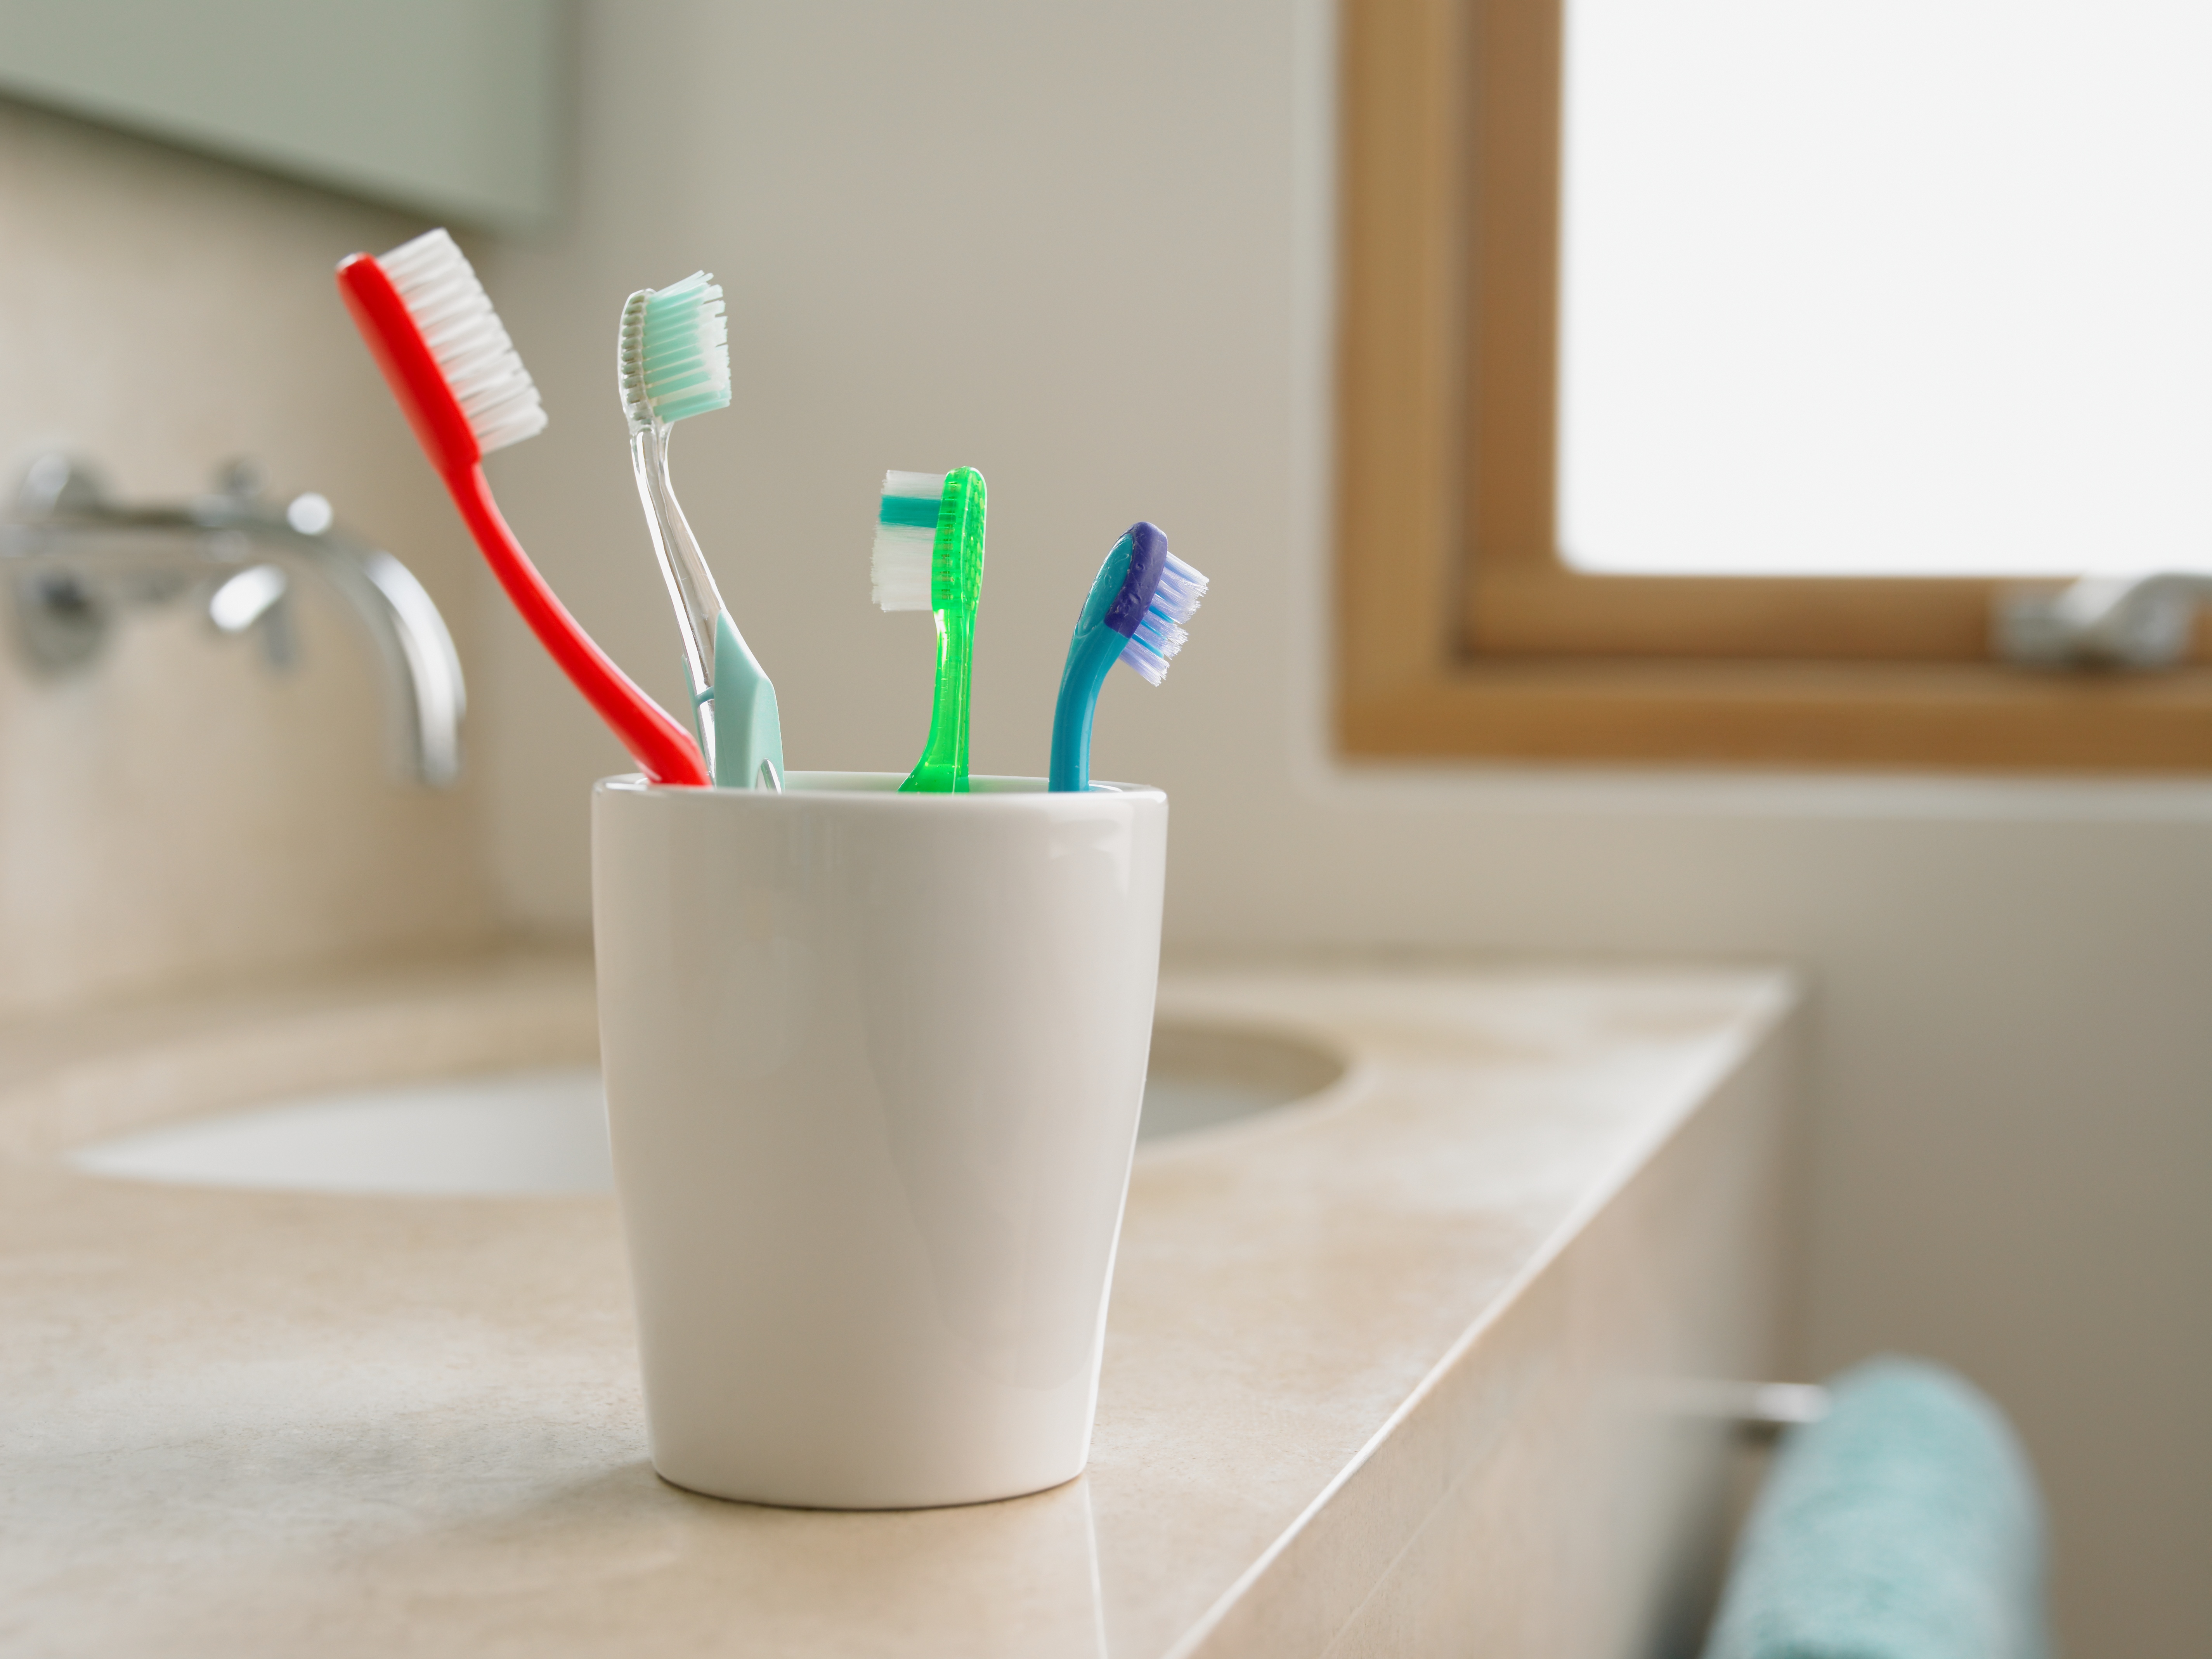 Your Toothbrush Is Teeming With Bacteria: Dentists Share How to Clean It